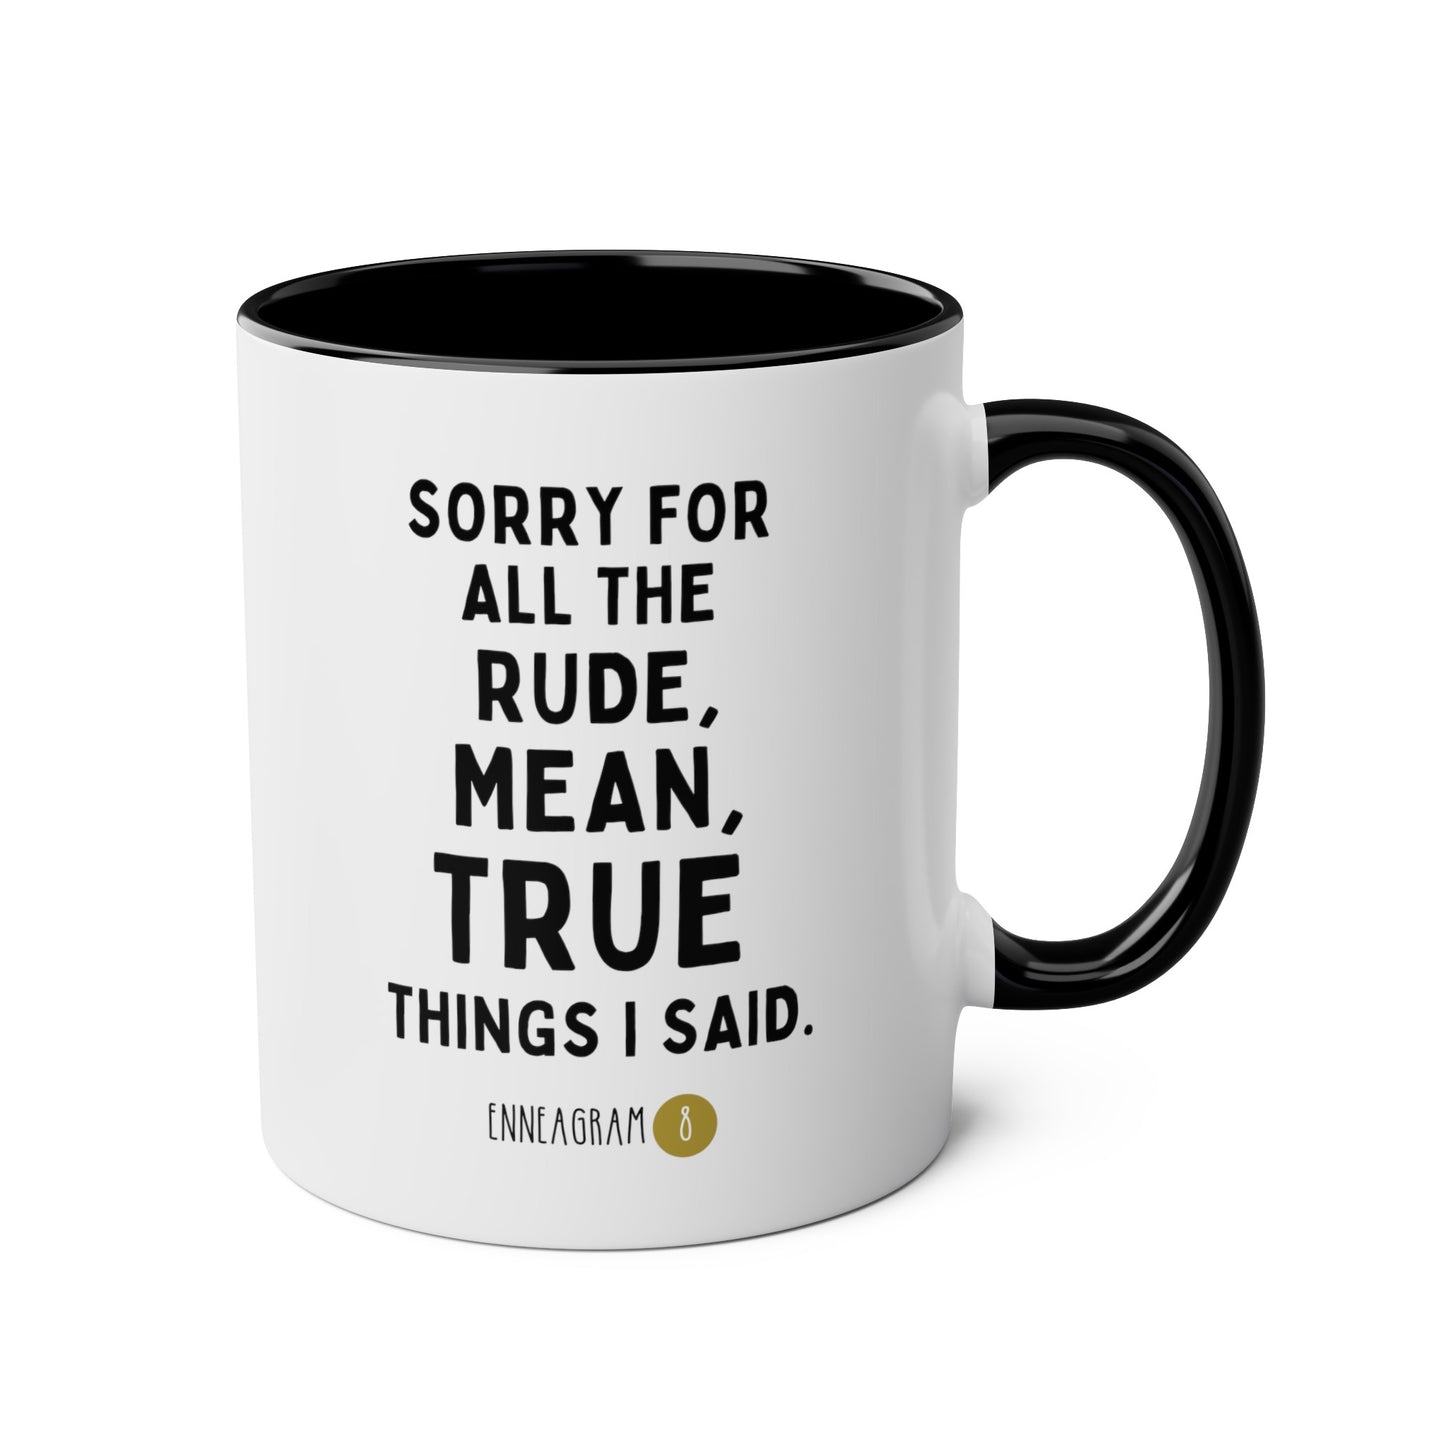 Sorry For All The Rude Mean True Things I Said Enneagram 8 11oz white with black accent funny large coffee mug gift for friend mbti personality test waveywares wavey wares wavywares wavy wares